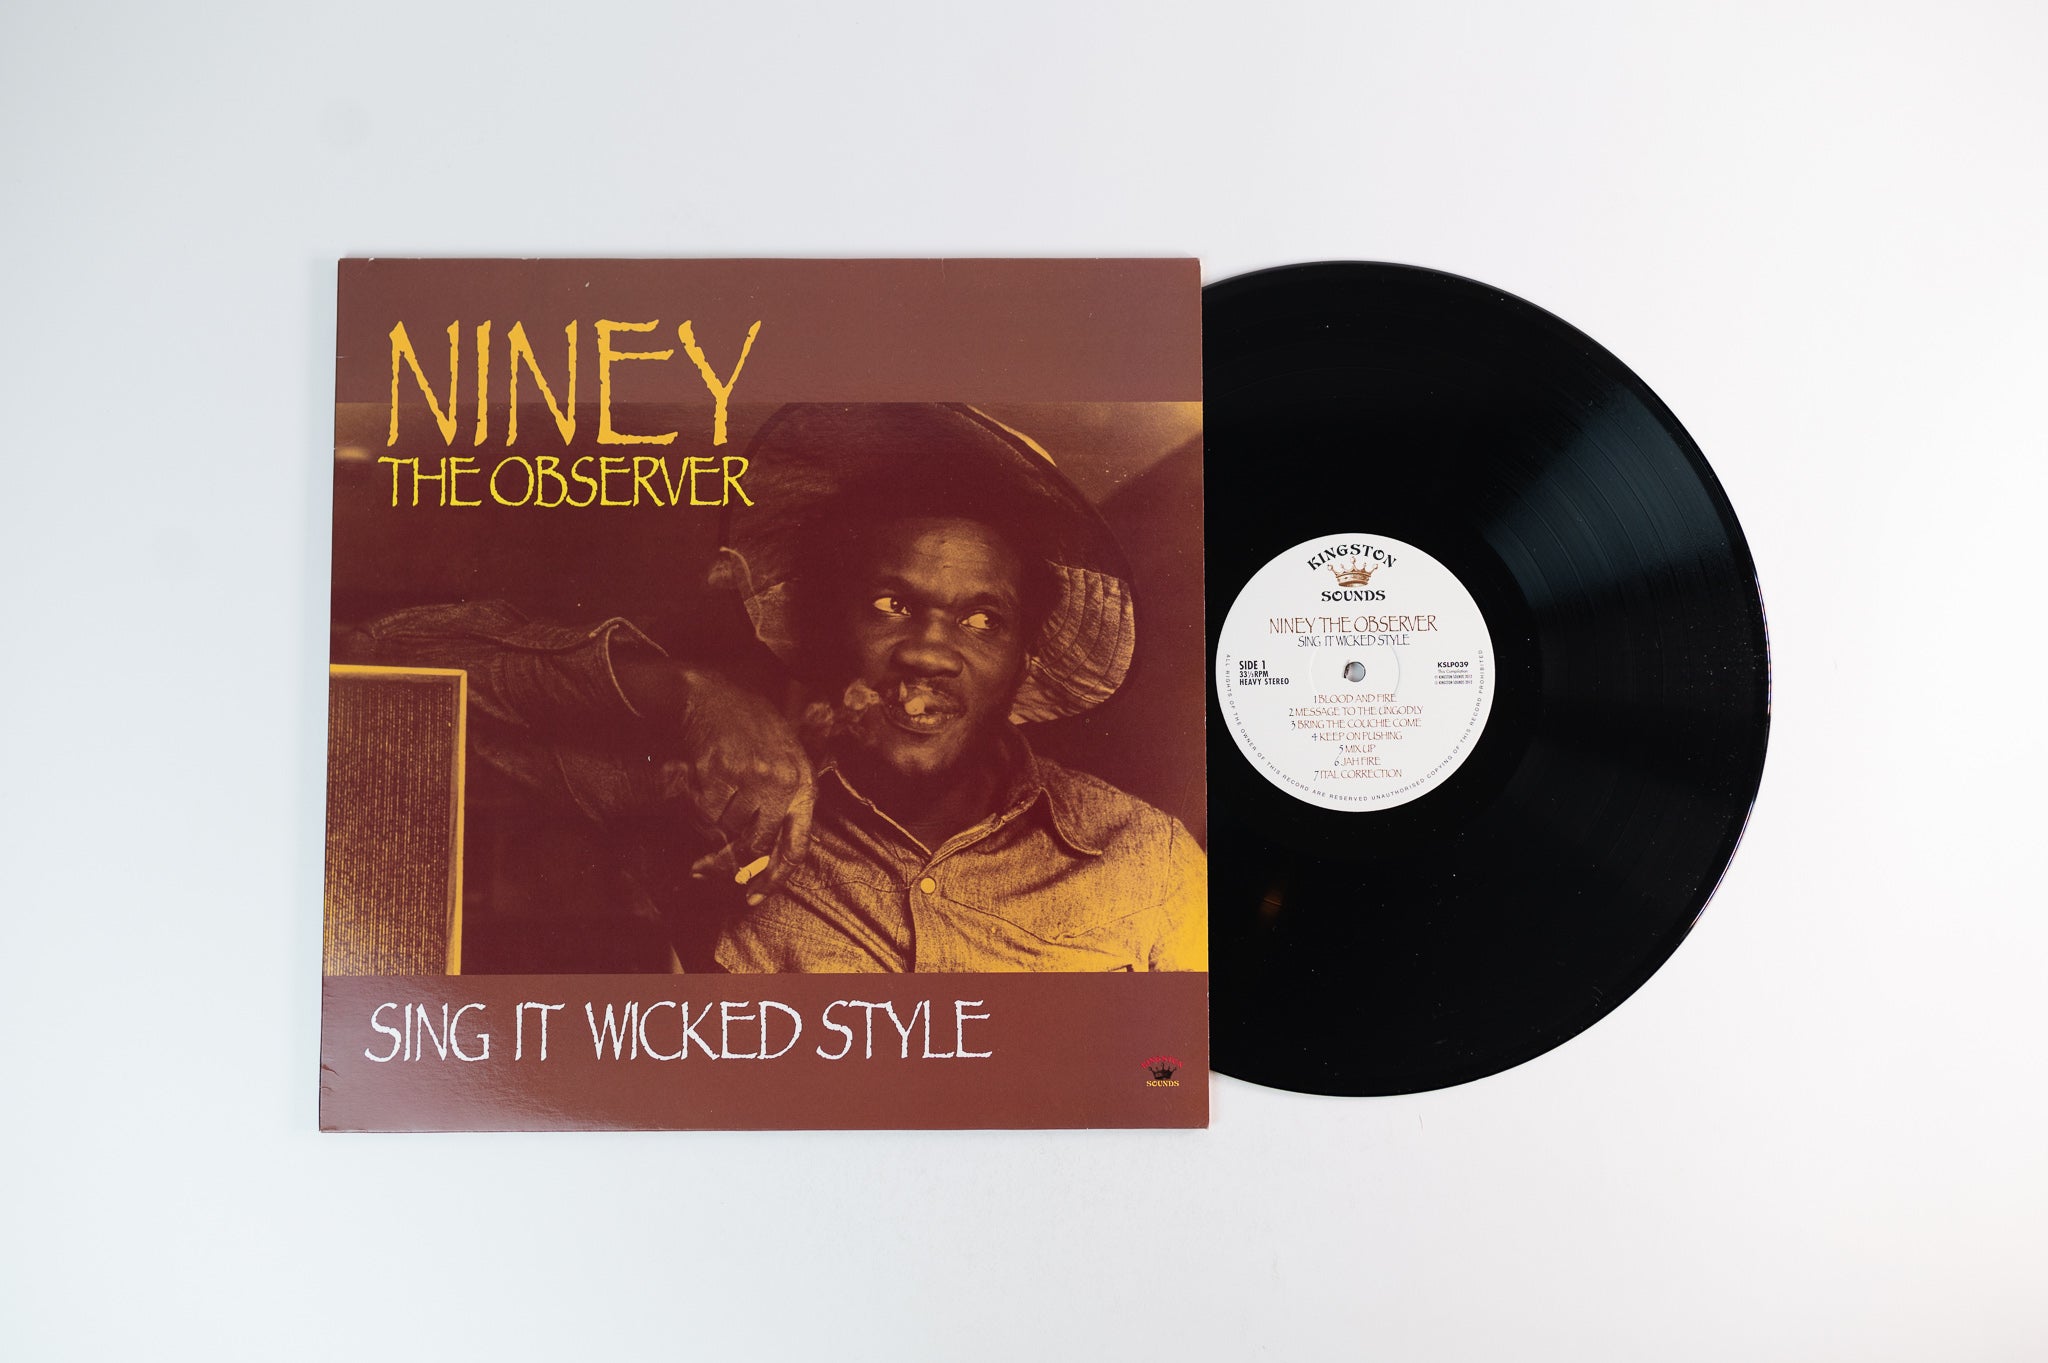 Niney The Observer - Sing It Wicked Style on Kingston Sounds